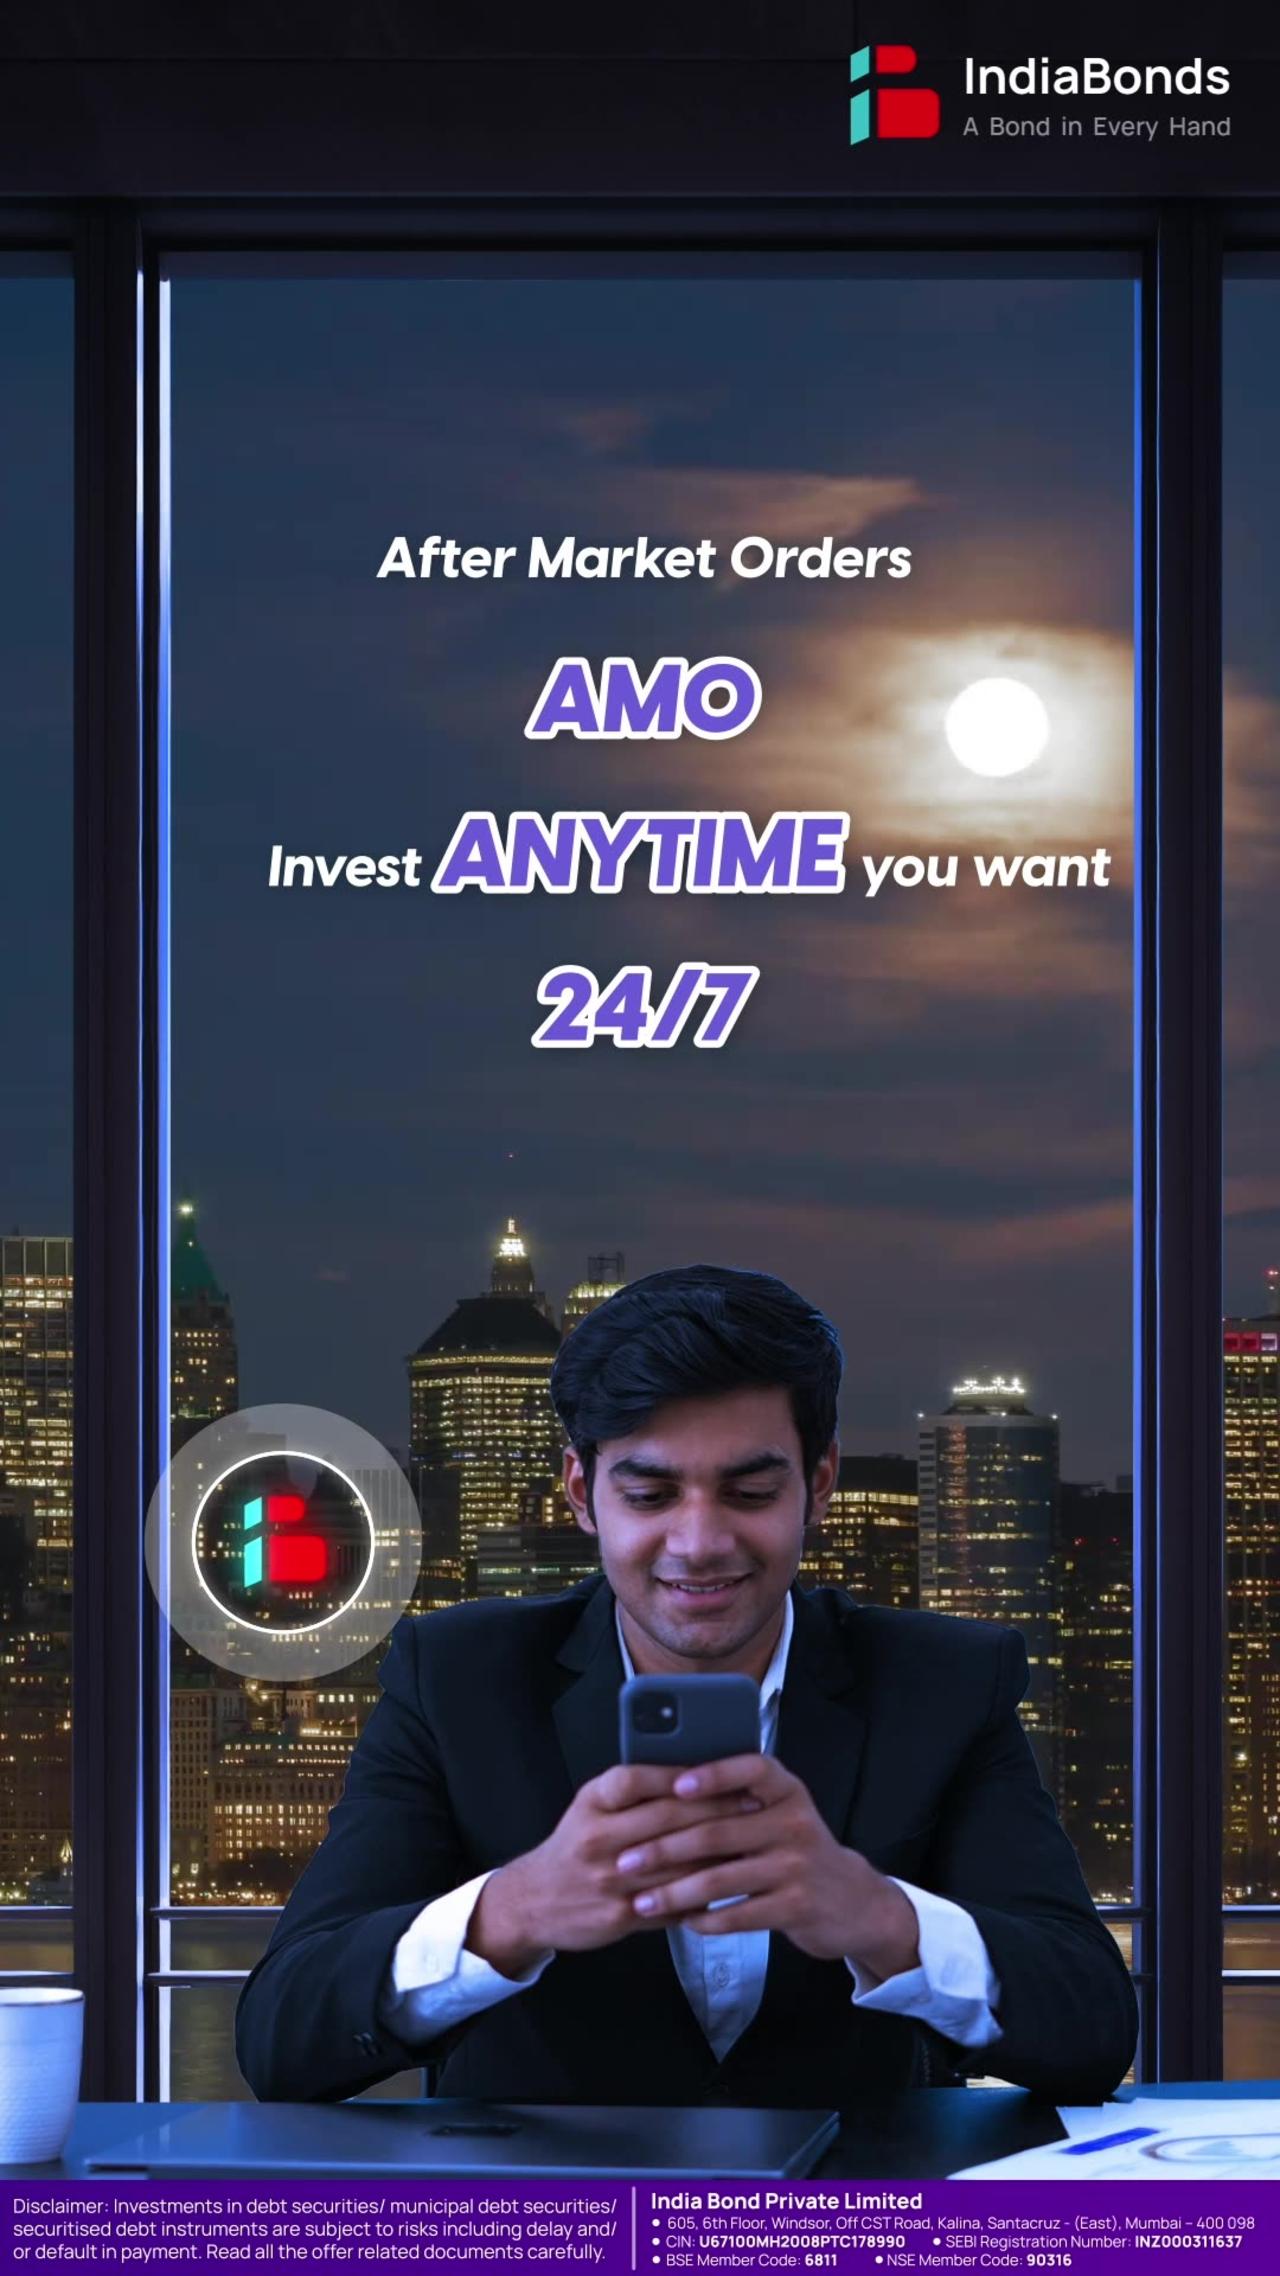 What is After Market Orders | IndiaBonds